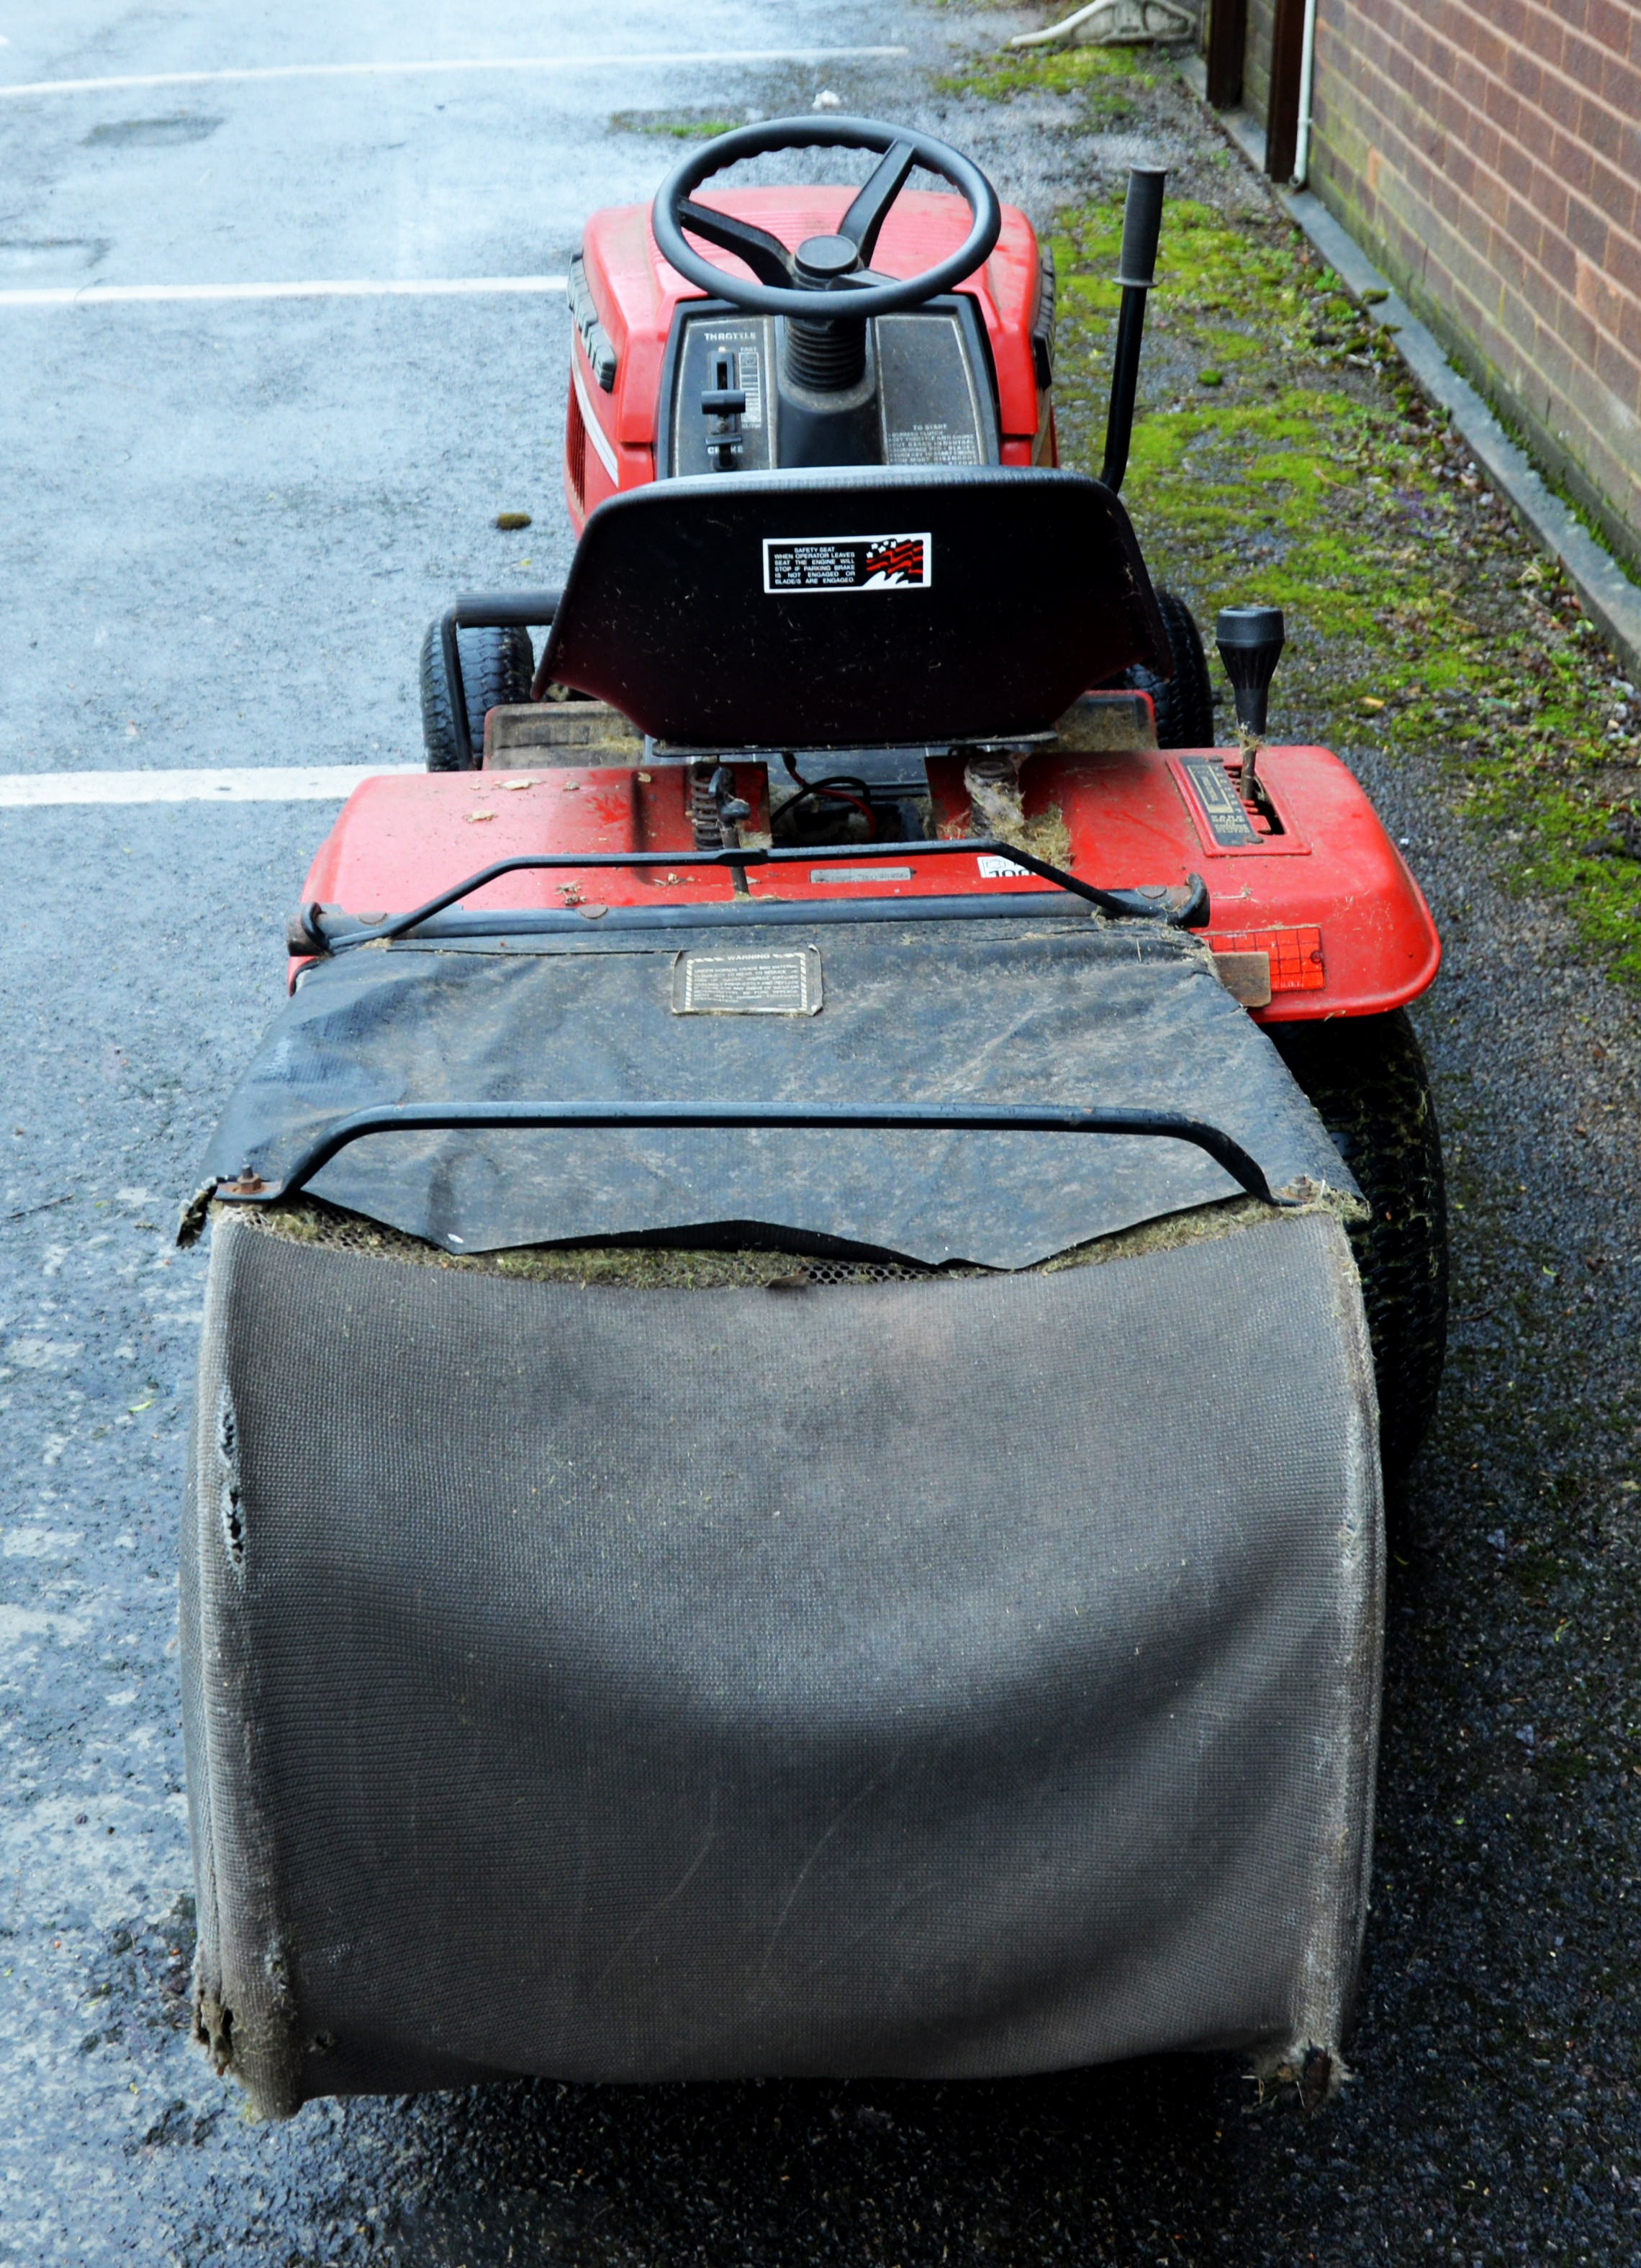 A SIT-ON LAWN MOWER, LAWNFITE, MODEL 550, 12.5 HP, 30" BLADE CUT, WITH KEY AND MANUALS - Image 3 of 4